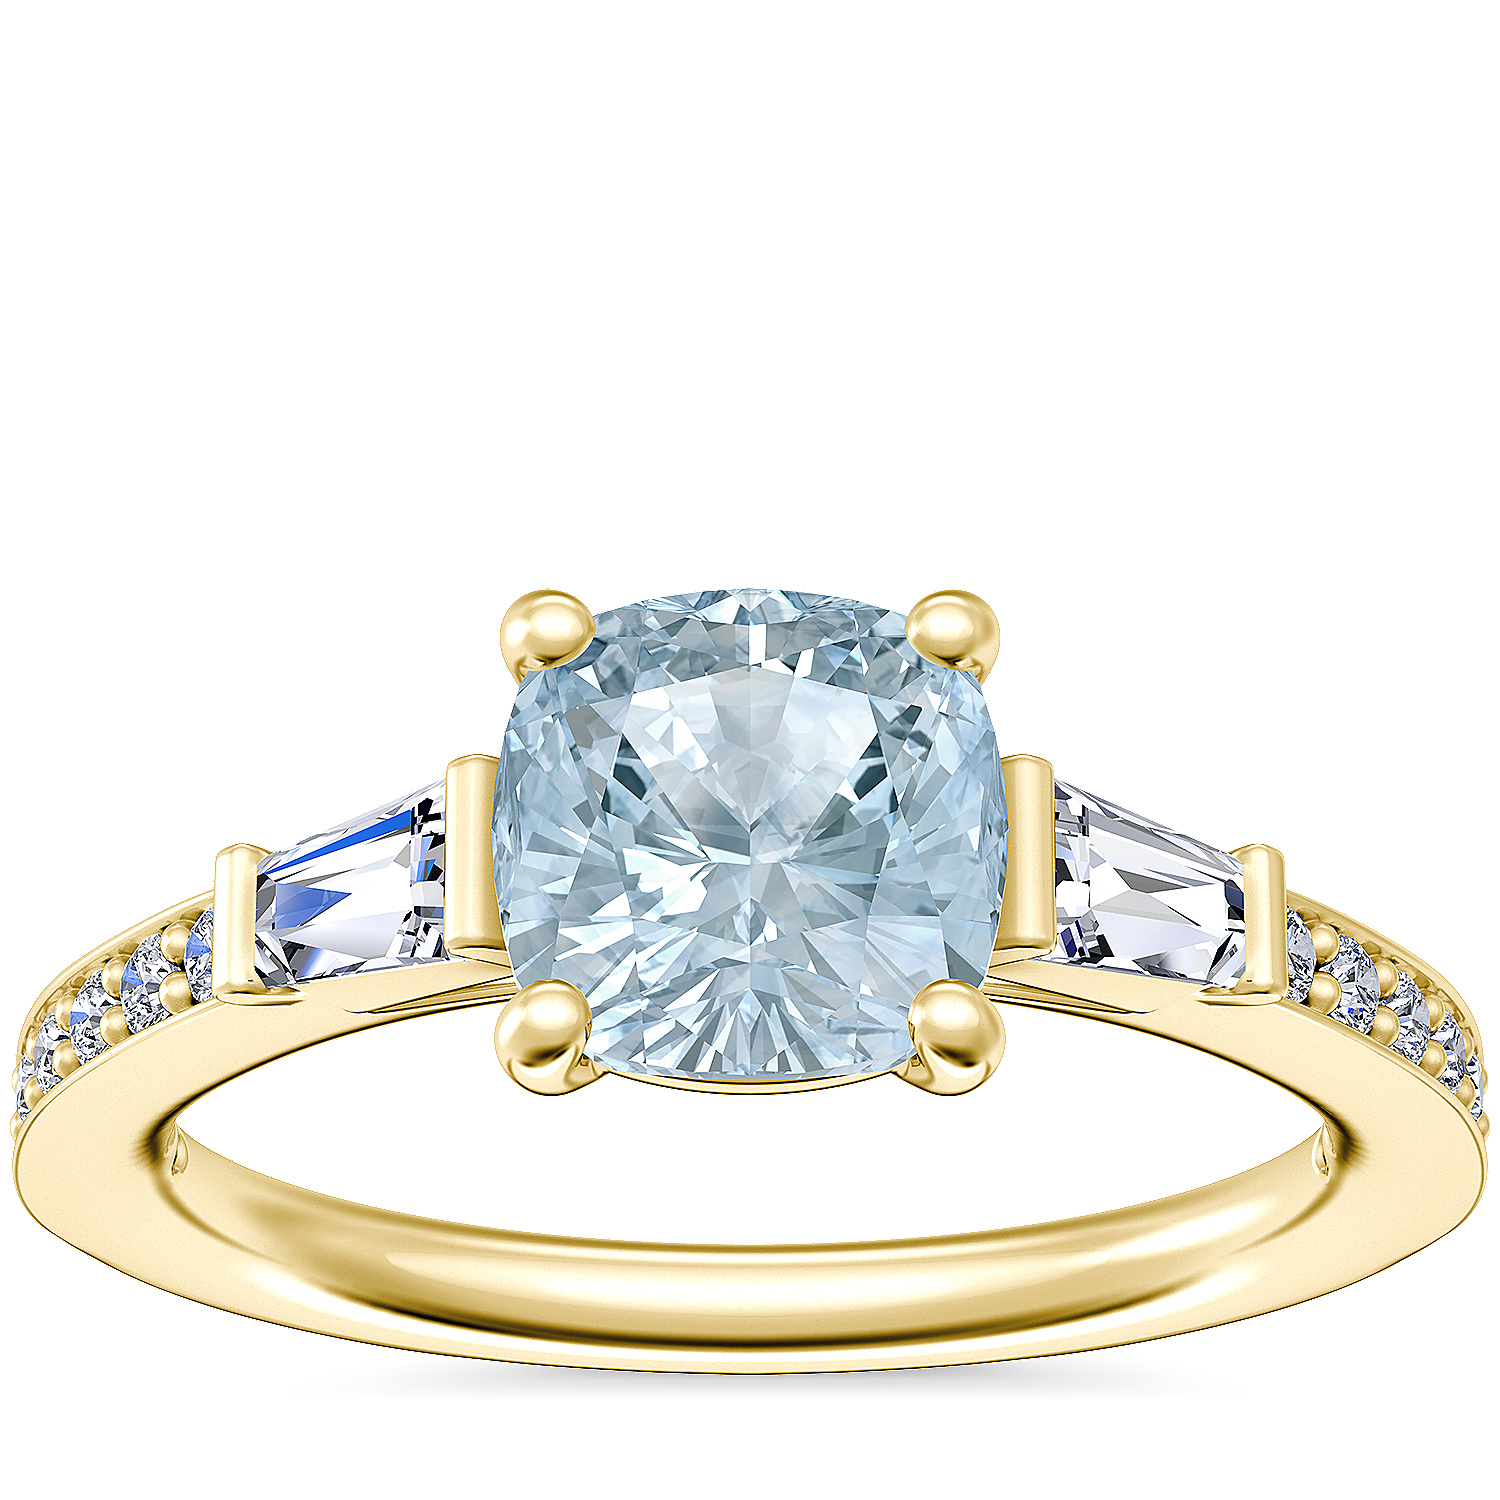 Tapered Baguette Diamond Cathedral Engagement Ring with Cushion Aquamarine in 14k Yellow Gold (6.5mm)